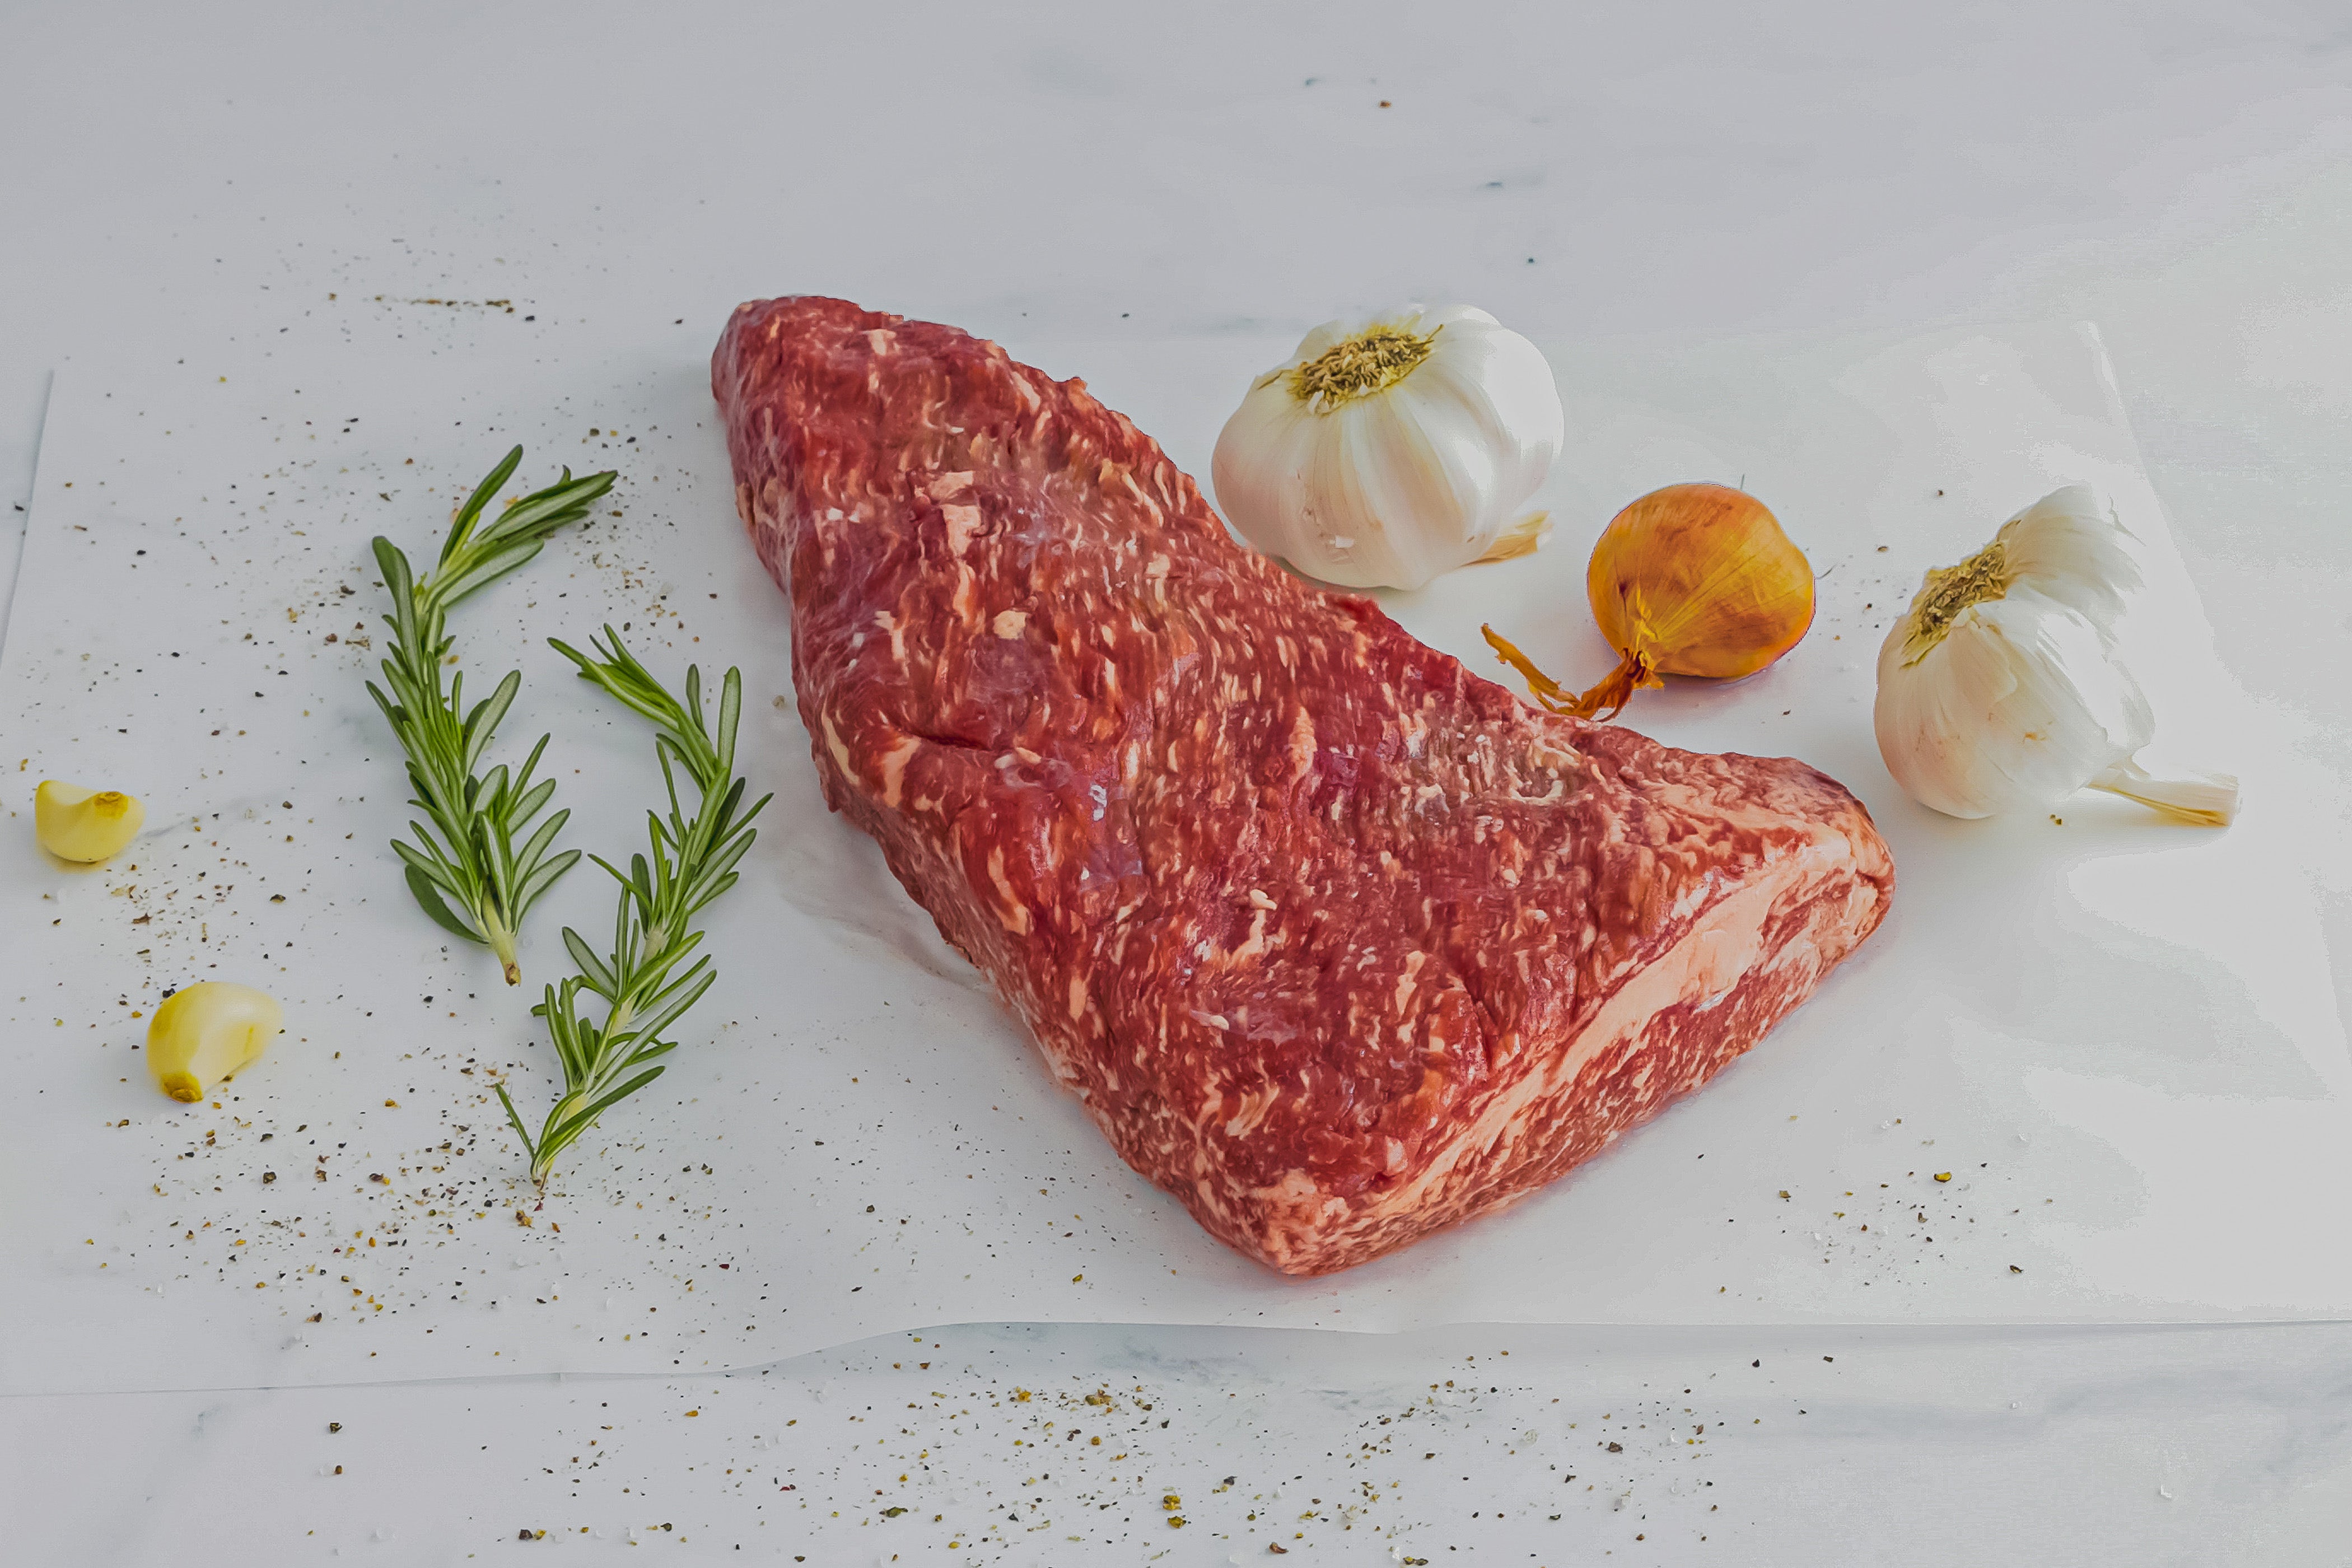 1/2 Beef Cut the way you want it. — Premier Foods Group